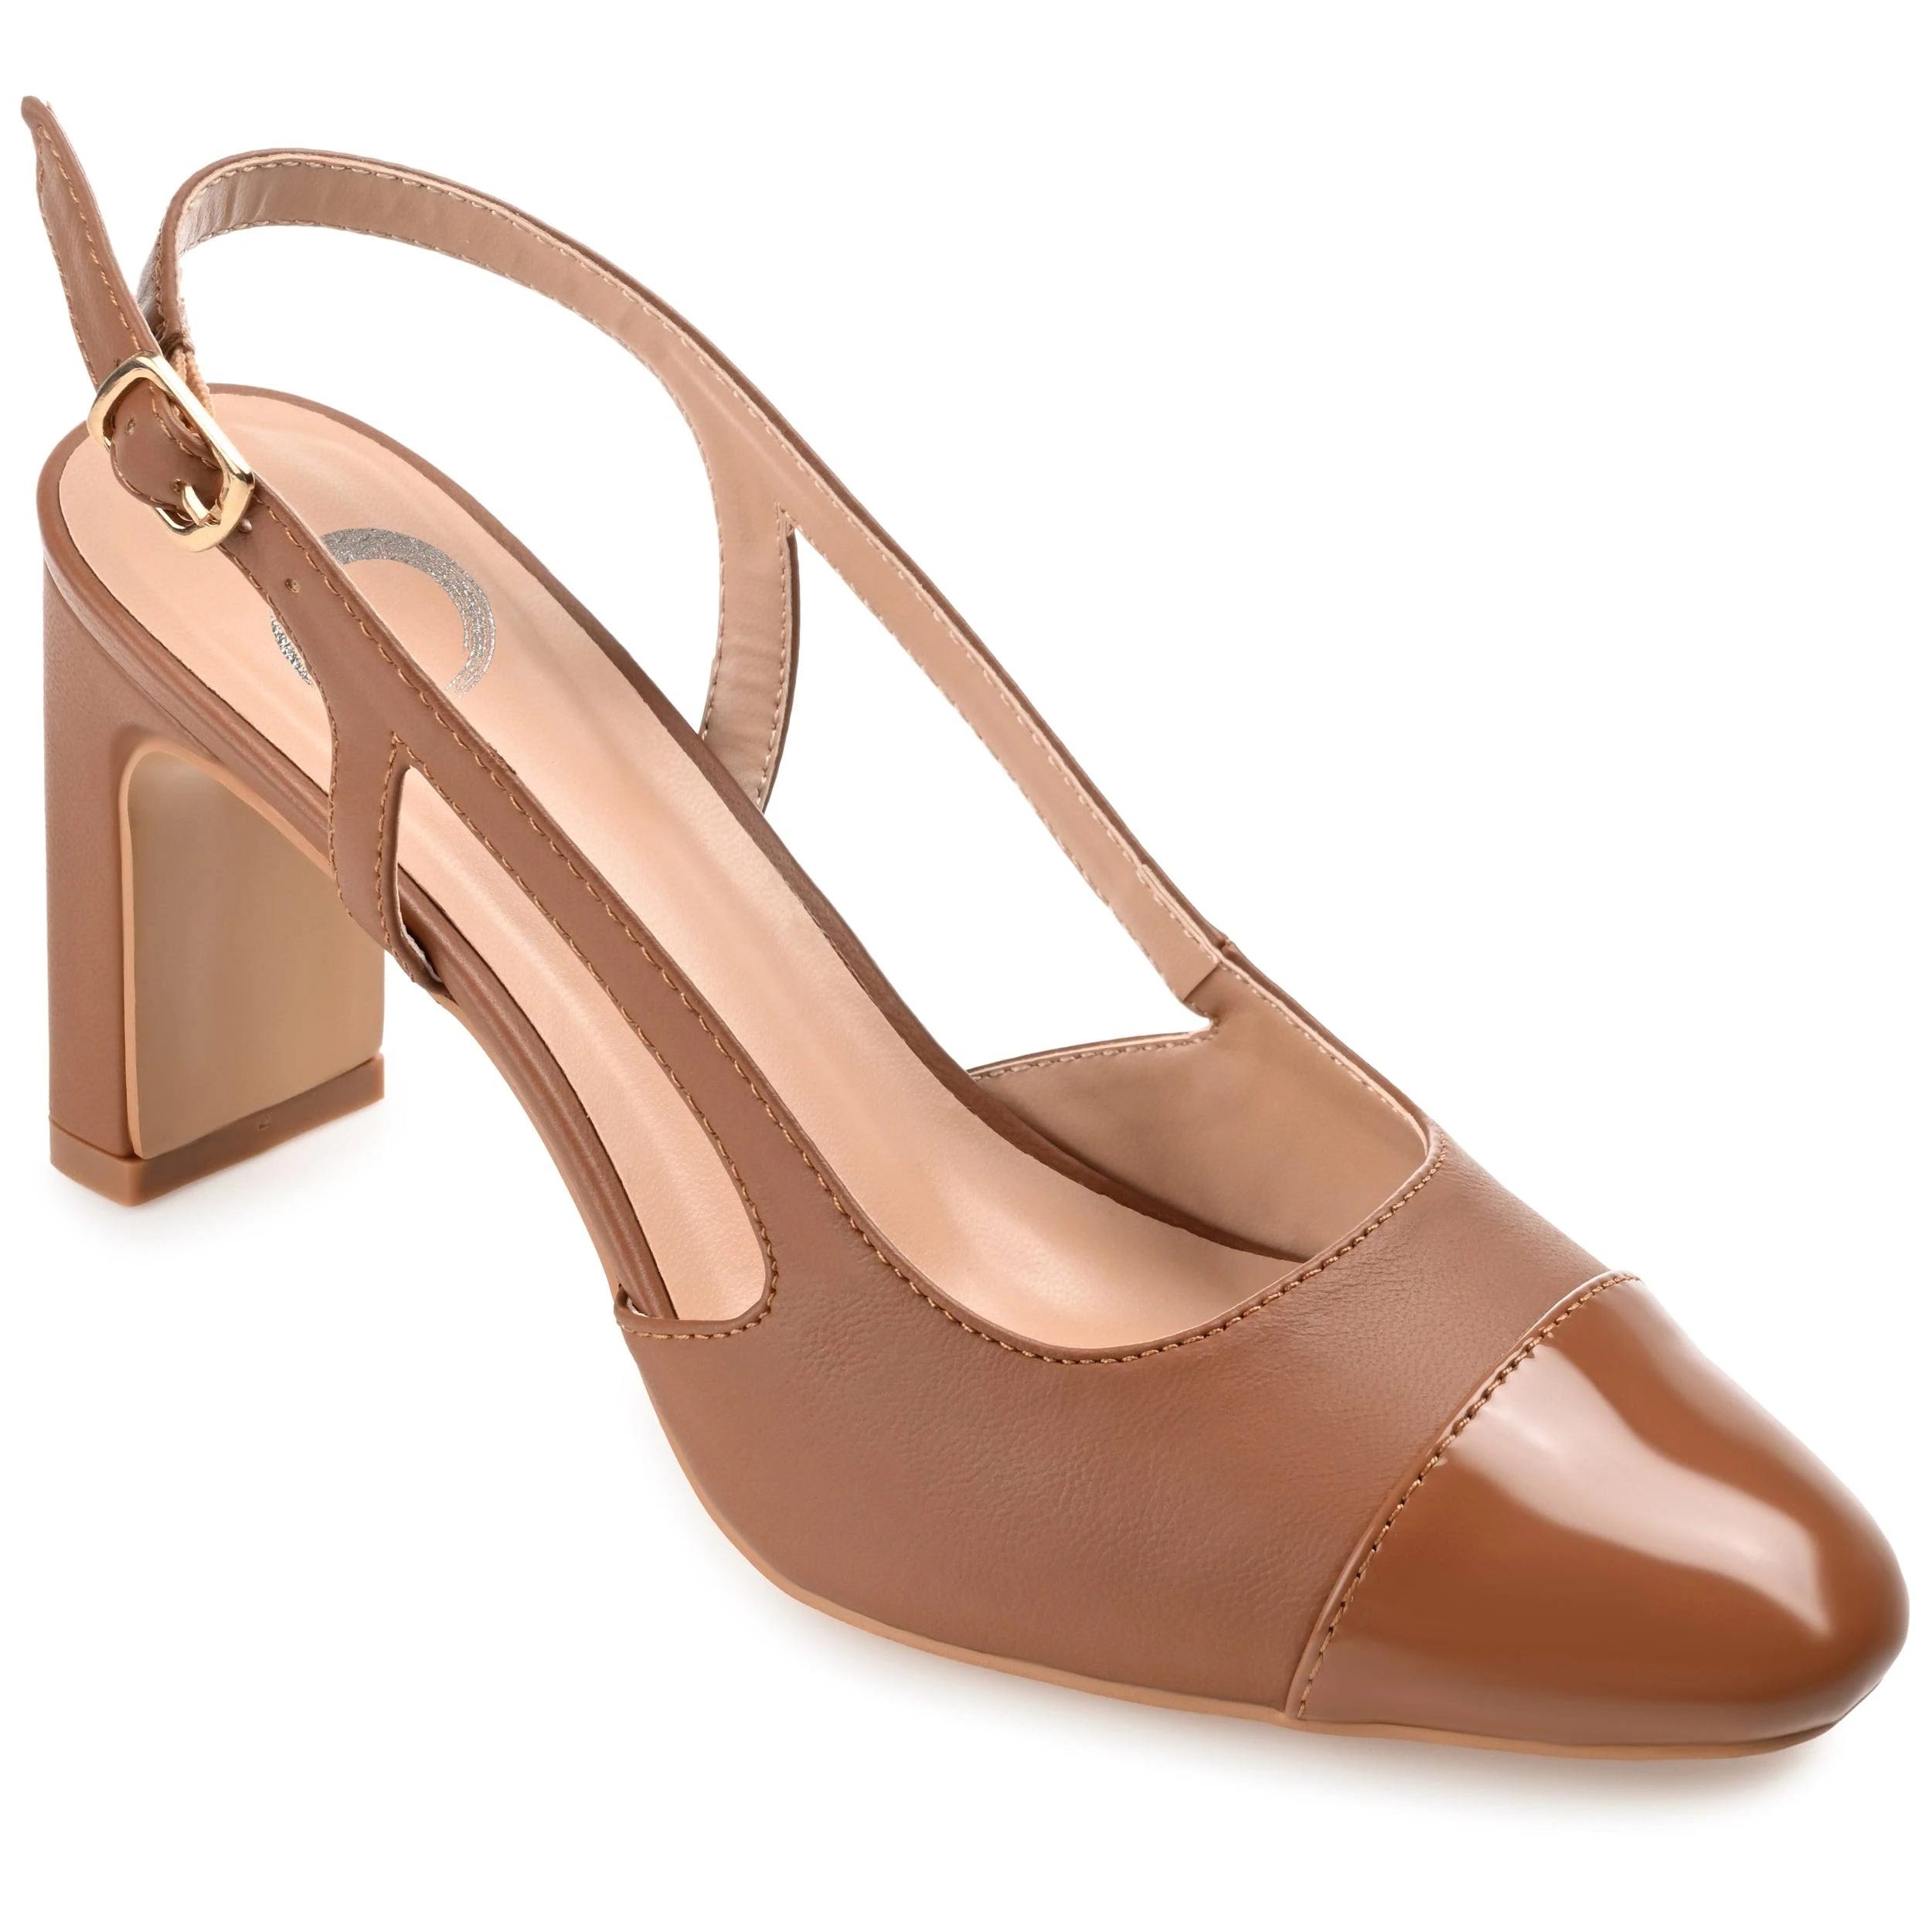 Tan Block Heel Pump with Cap Detail and Buckled Sling-Back Strap | Image